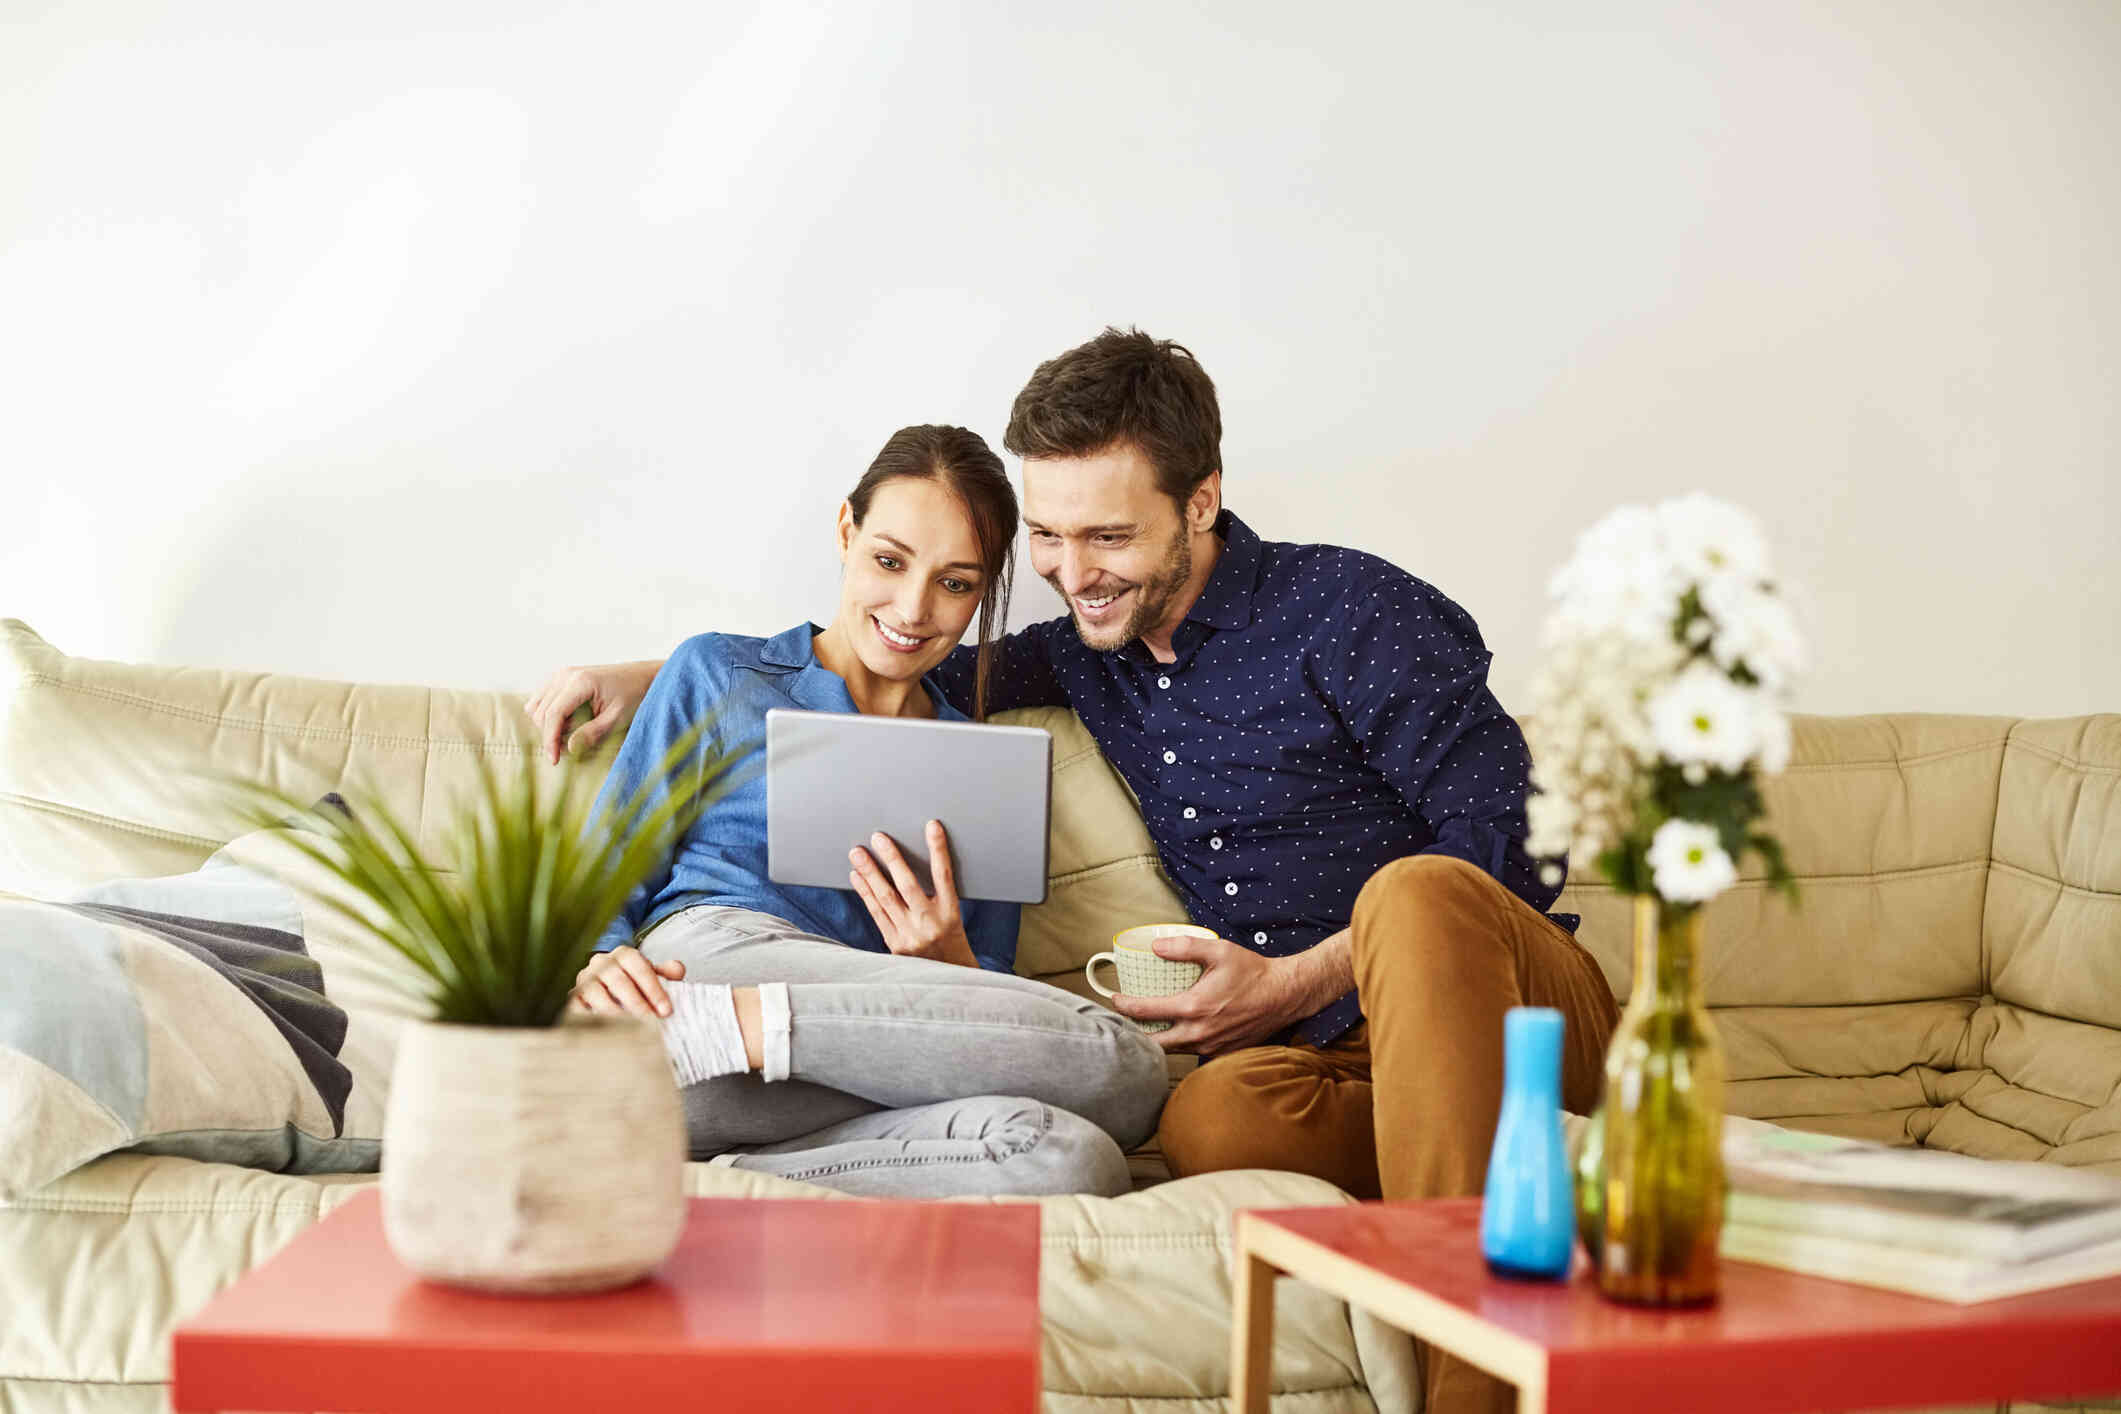 A male and female couple sit sie by side casually on their couch as they both smile and look at the tablet in the womans  hand.